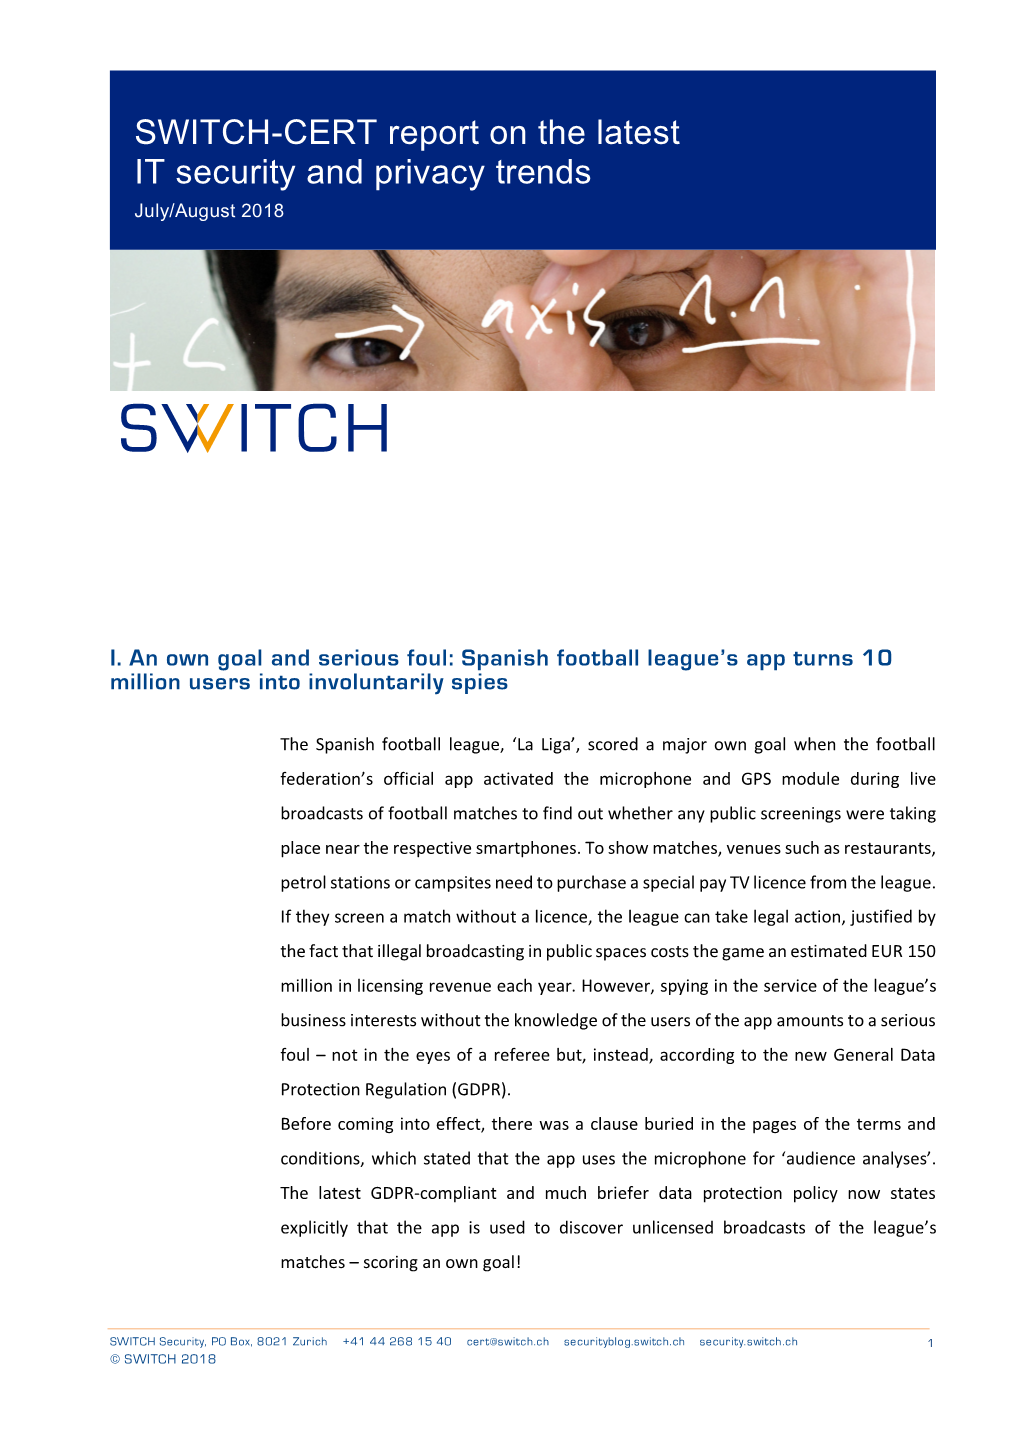 SWITCH-CERT Report on the Latest IT Security and Privacy Trends July/August 2018